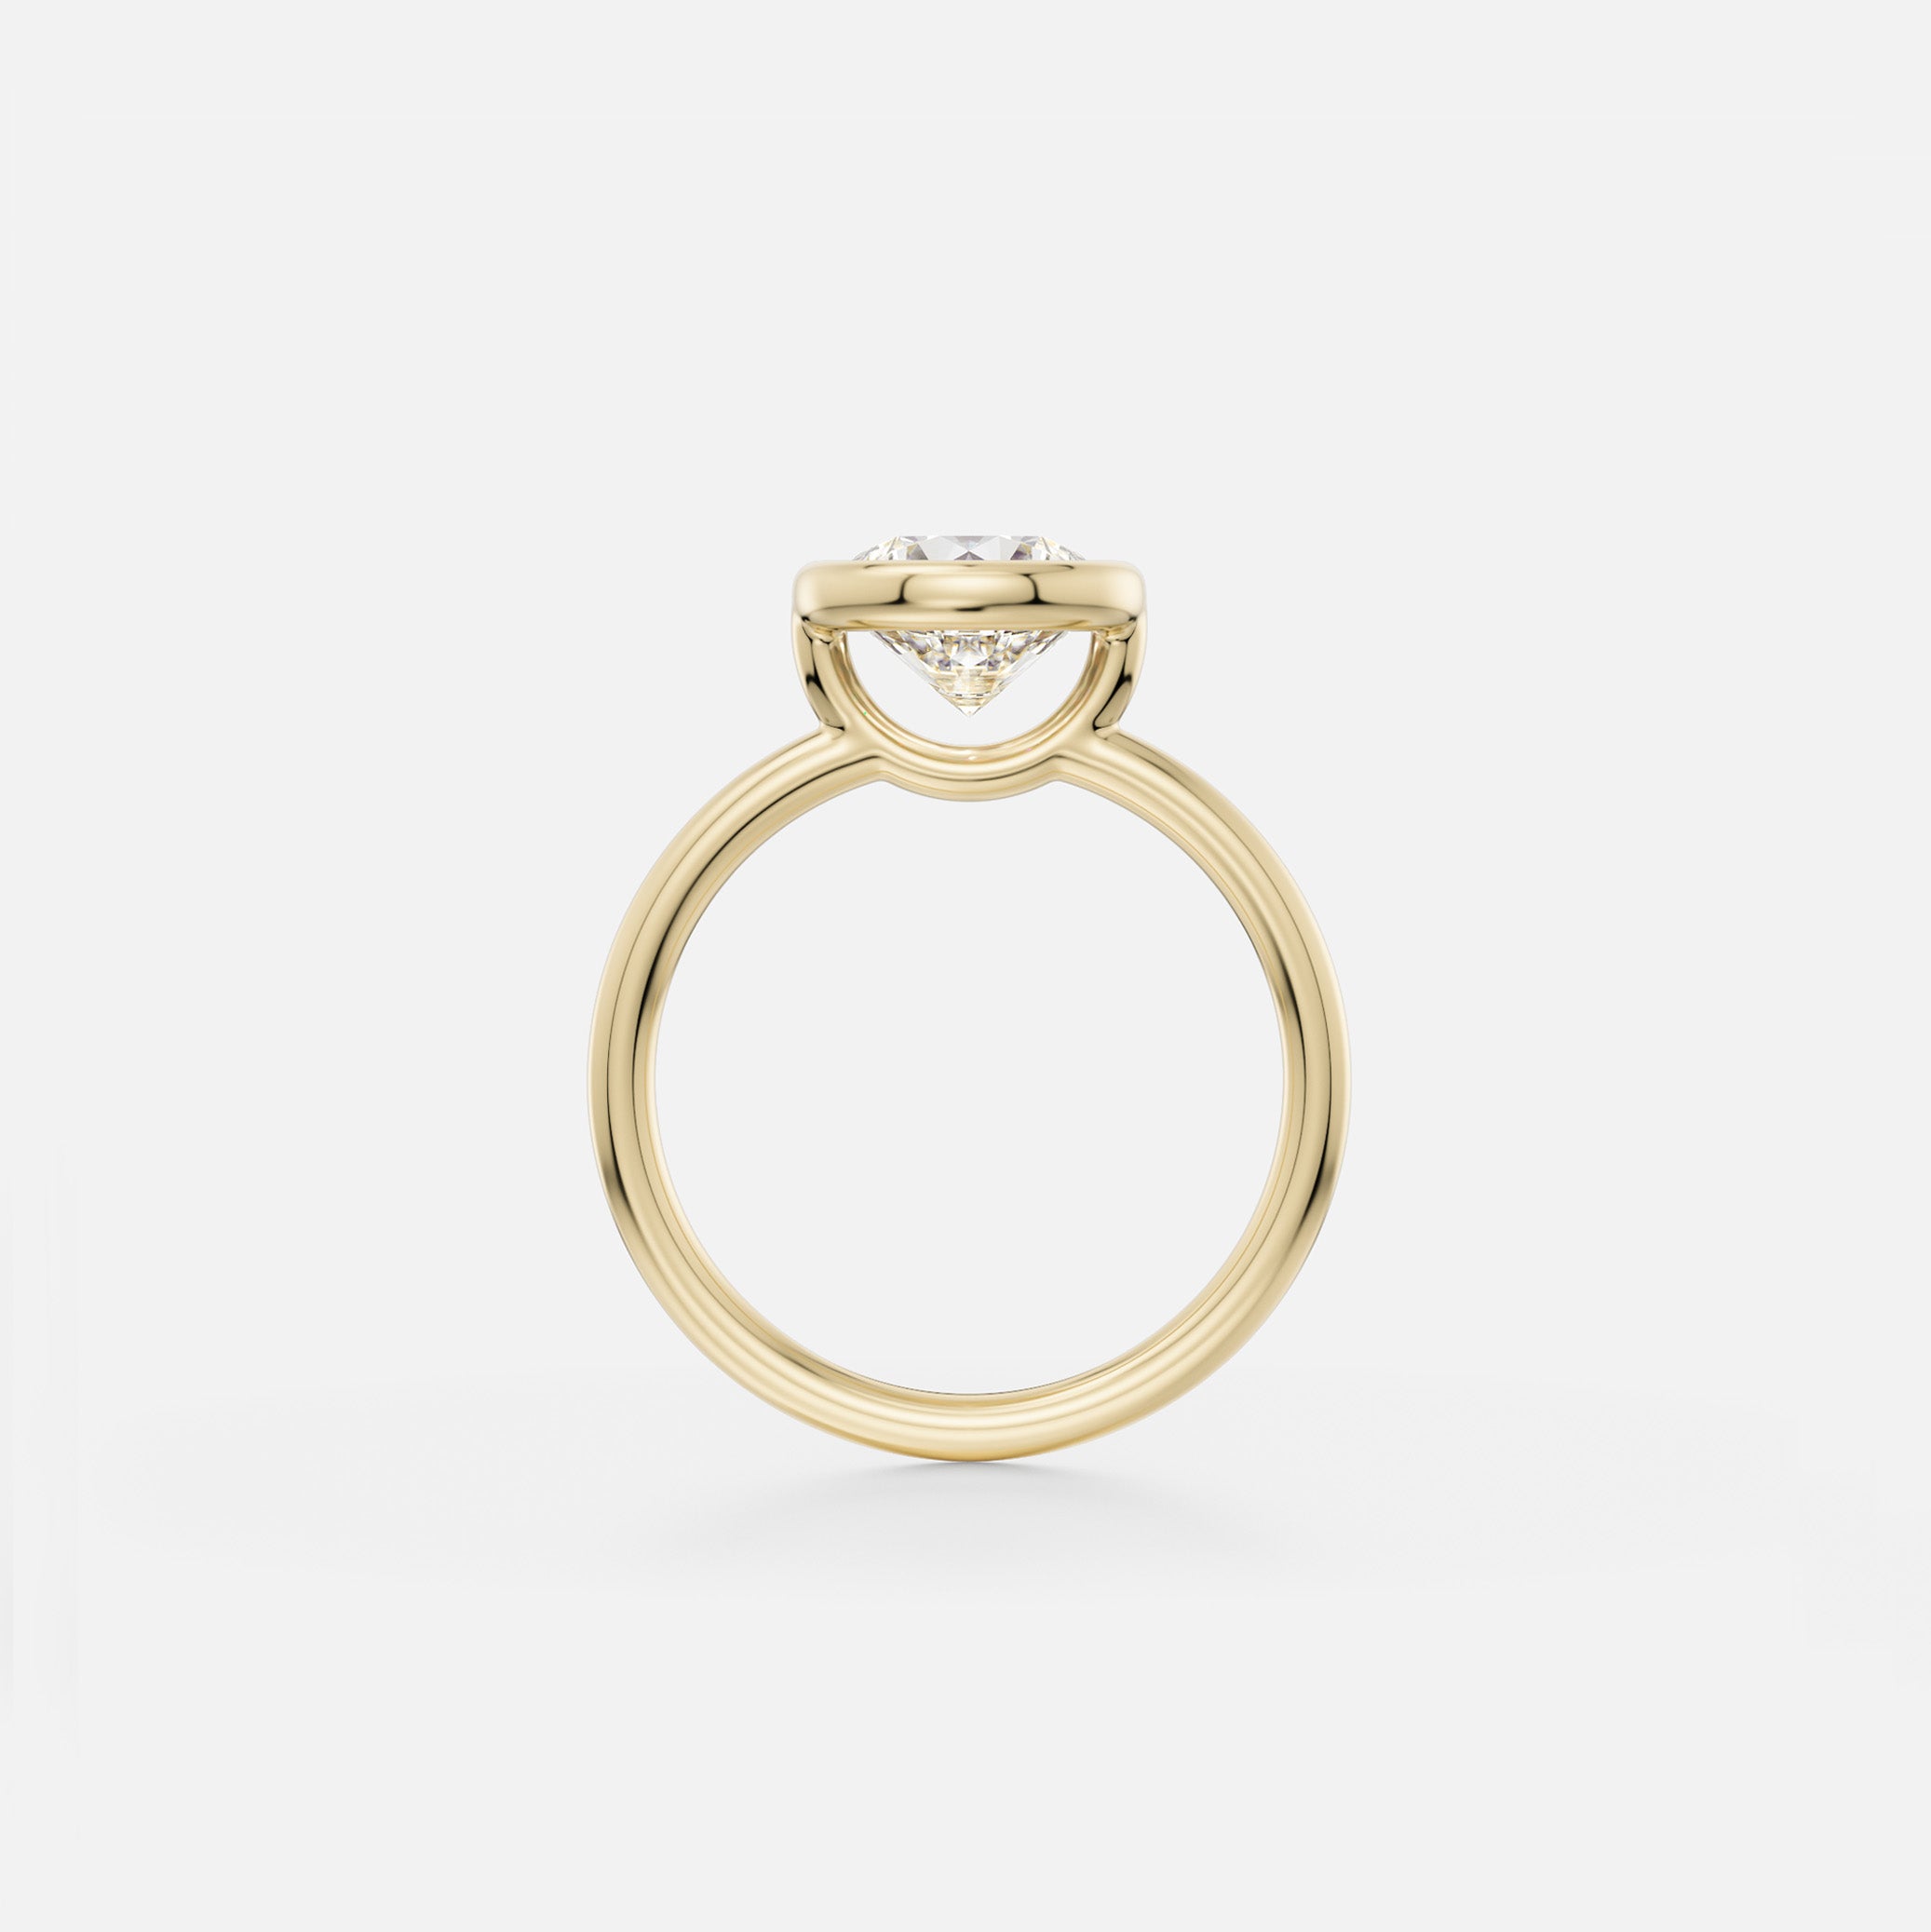 ARTI thin round band with Round Cut Profile Bezel Set Unique Diamond Gemstone  Engagement Ring Setting in recycled 14k Gold or platinum handmade by SHW Fine Jewelry NYC